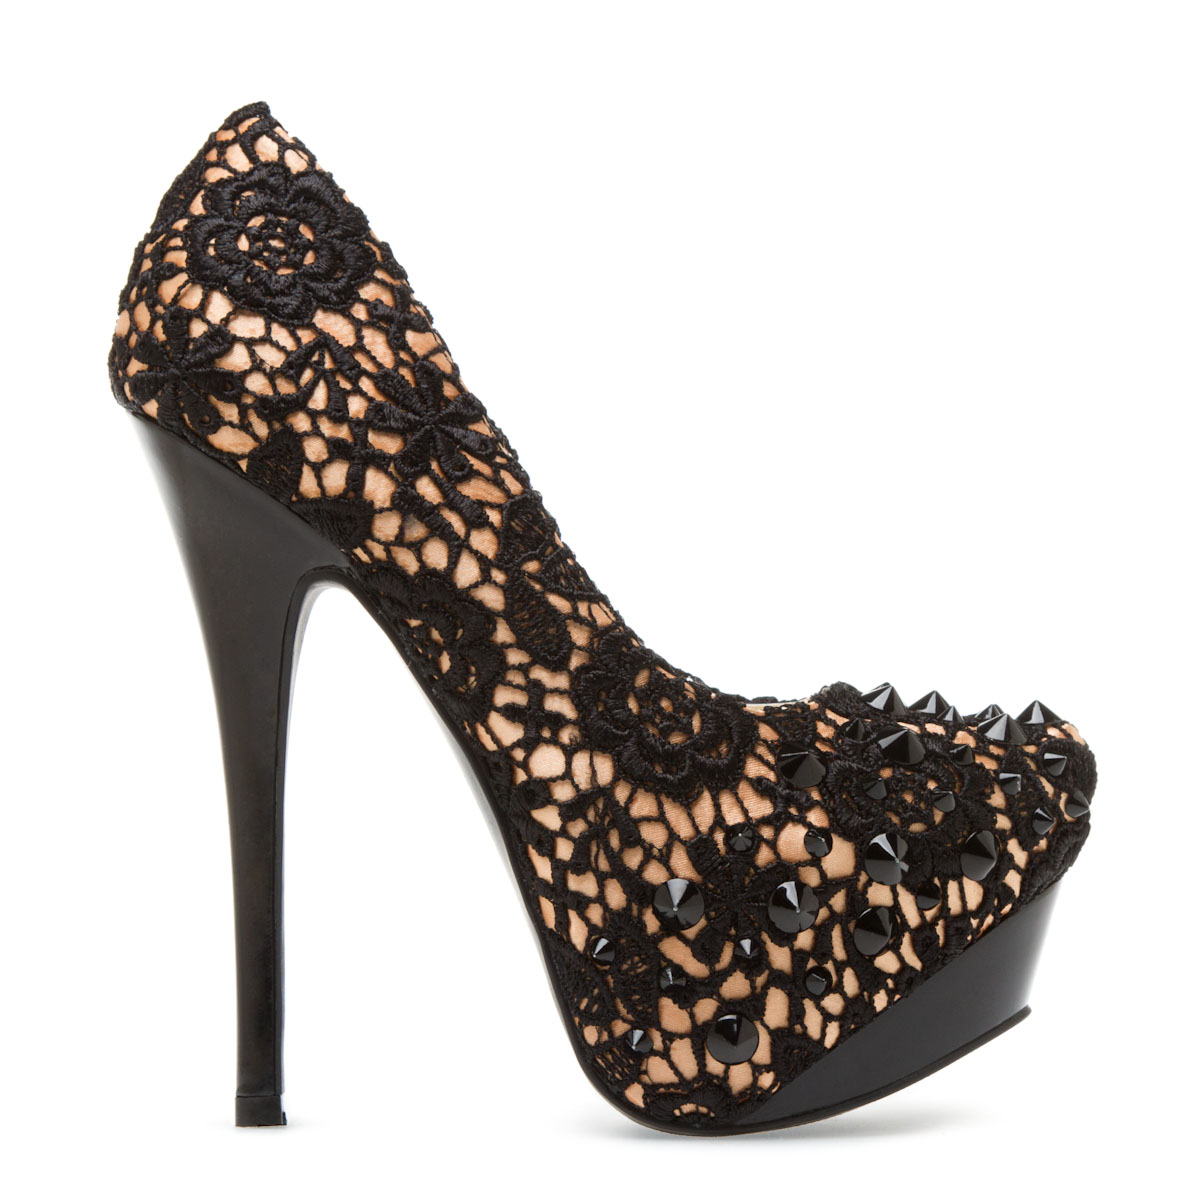 Crocheted high heels from ShoeDazzle are popular and cheap